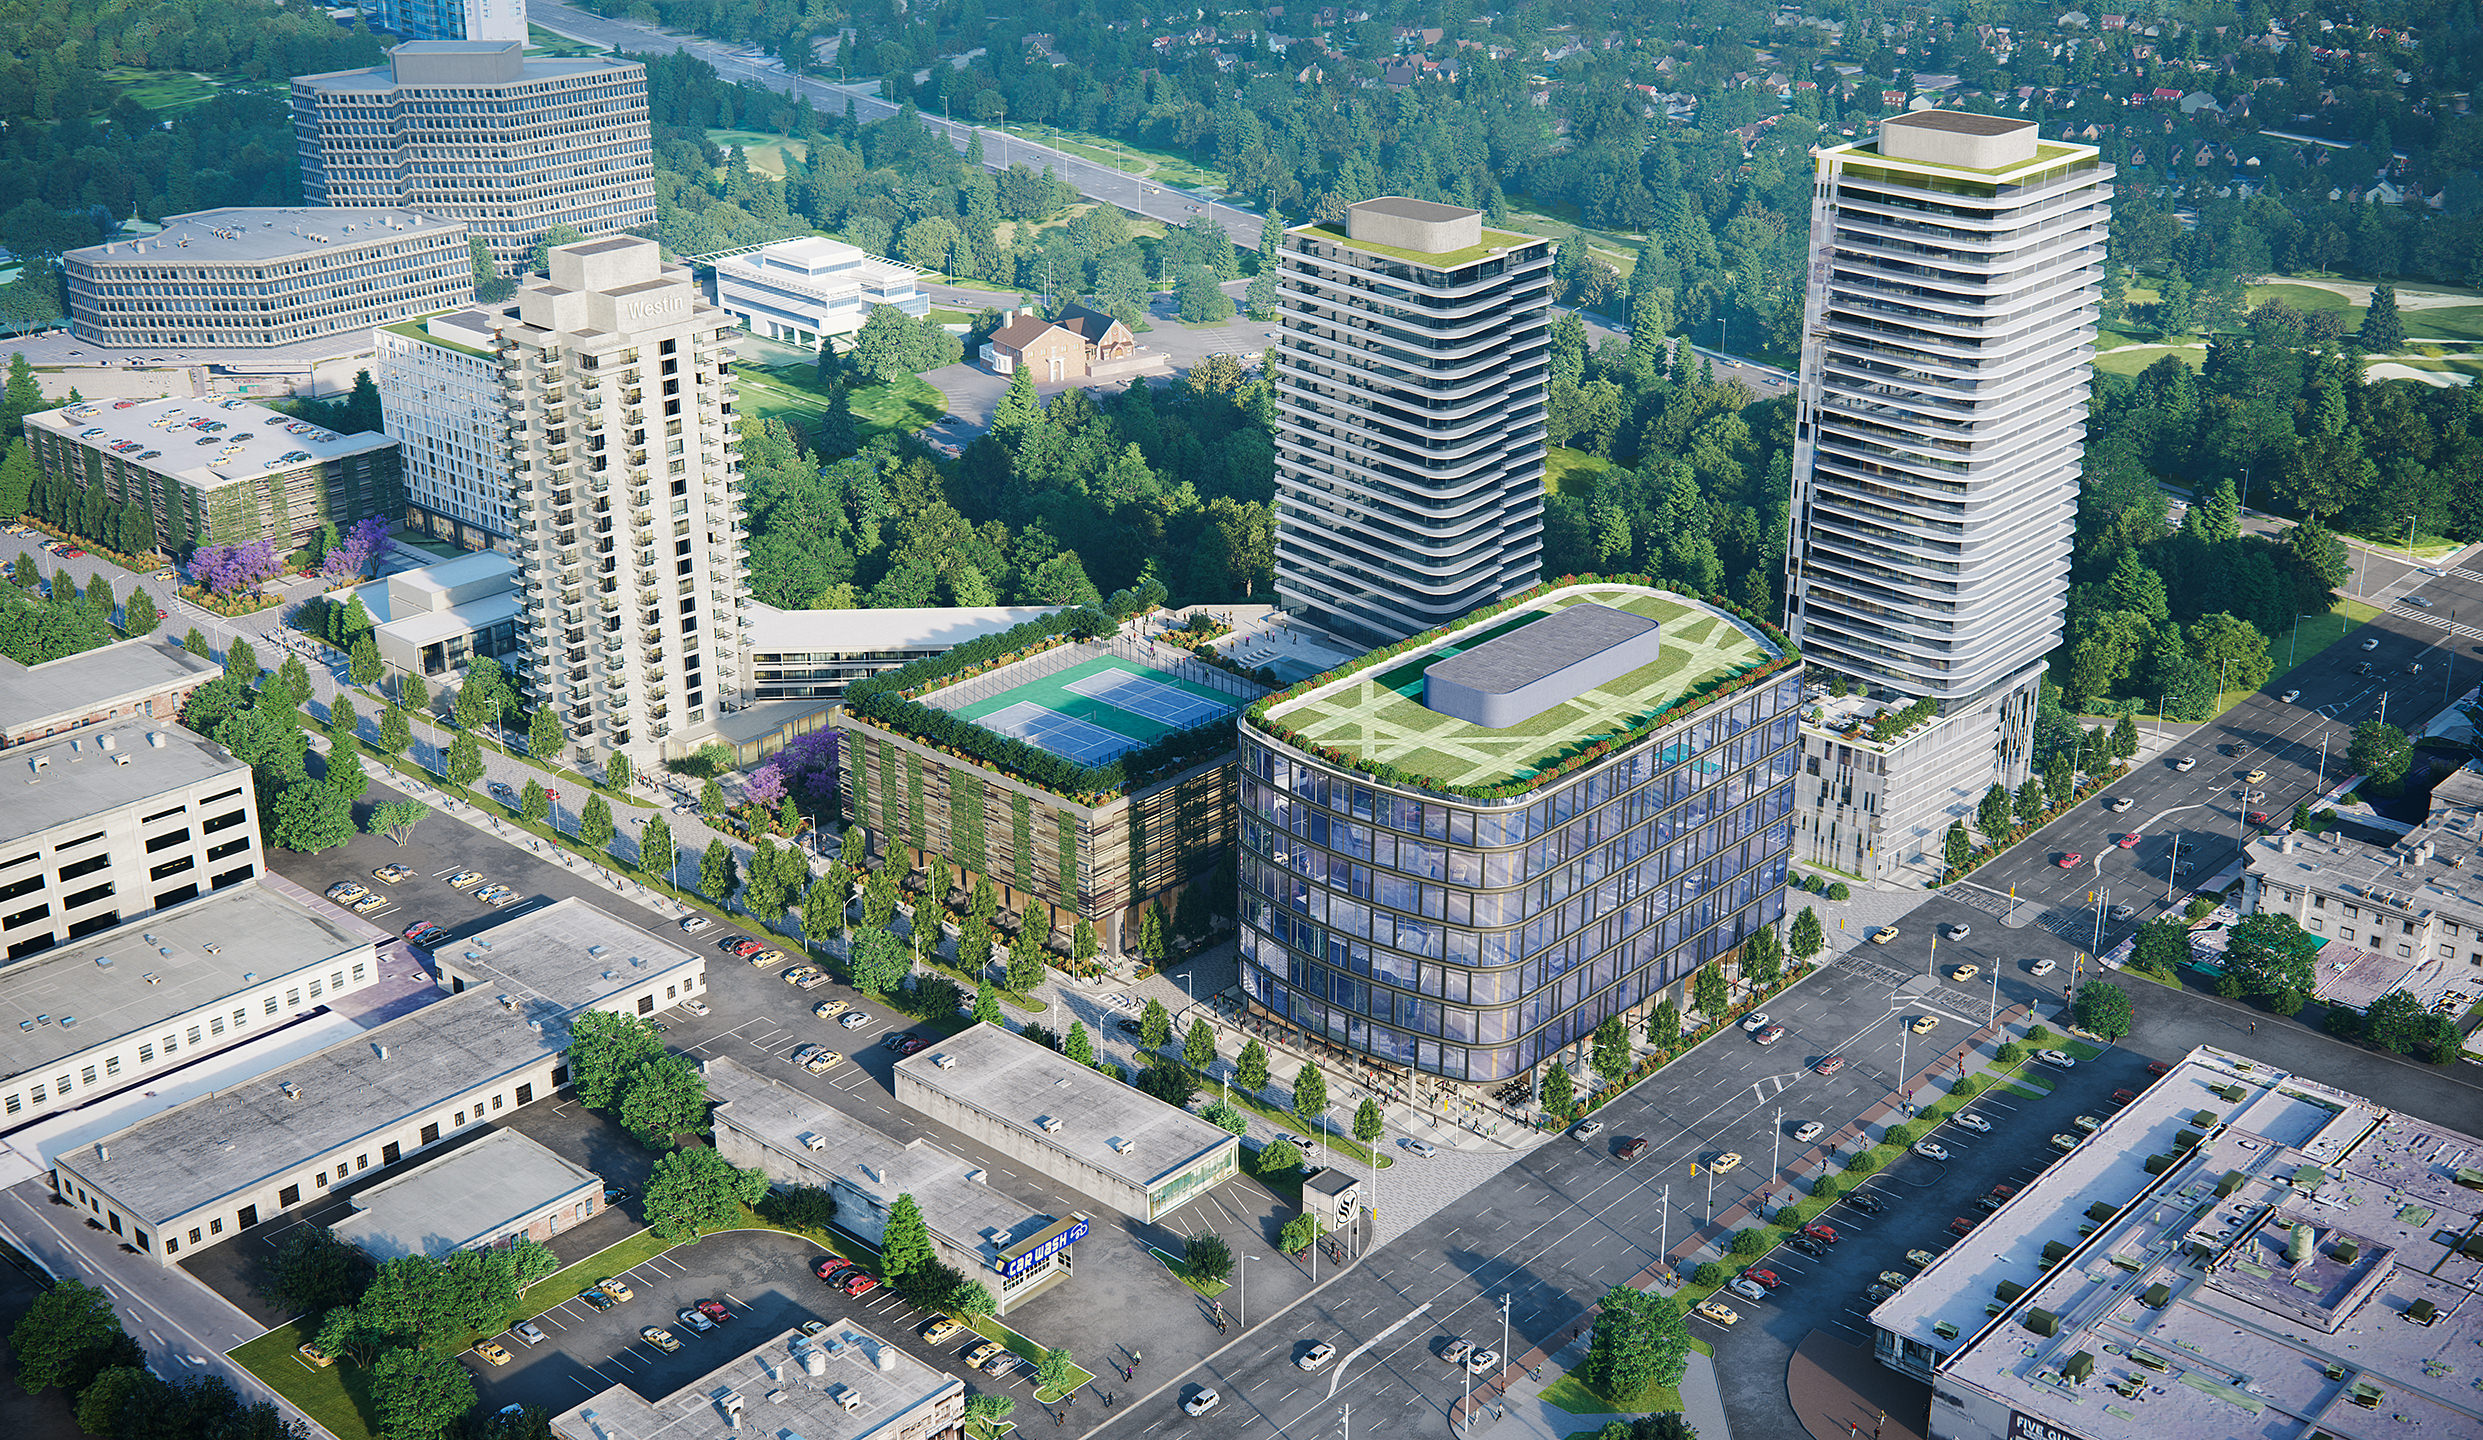 Architectural 3D visualization of West Prince hospitality complex in Toronto, Canada pictured from a bird’s eye view and consisting of three residential high-rise towers and two amenities buildings with tennis courts and green terraces on the roof